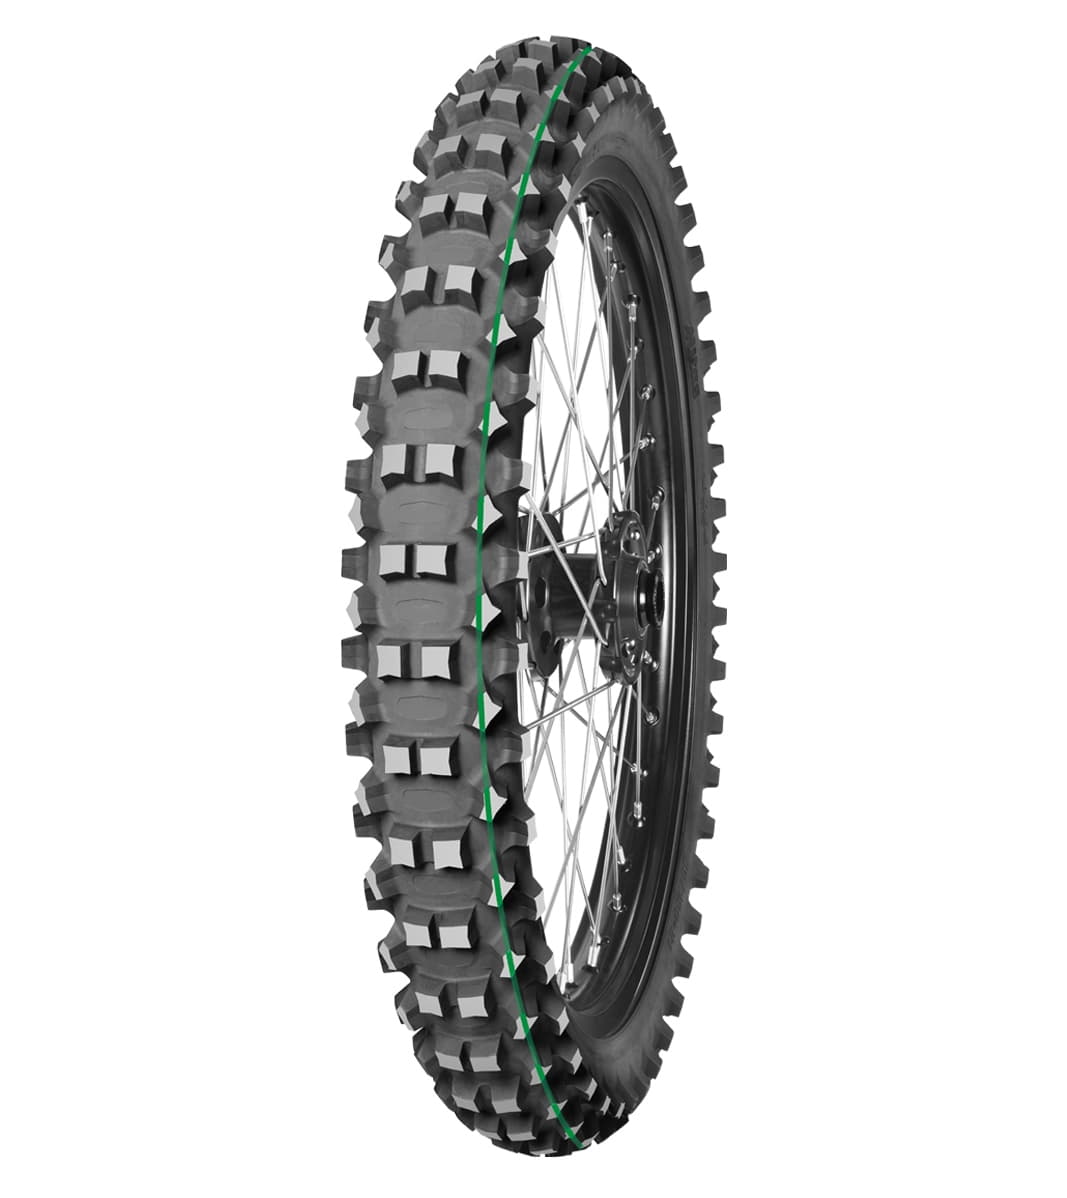 Mitas TERRA FORCE-MX SM 90/90-21 Enduro Competition Off-Road SUPER LIGHT 54M Green Tube Front Tire Motorcycle Tires Mitas 